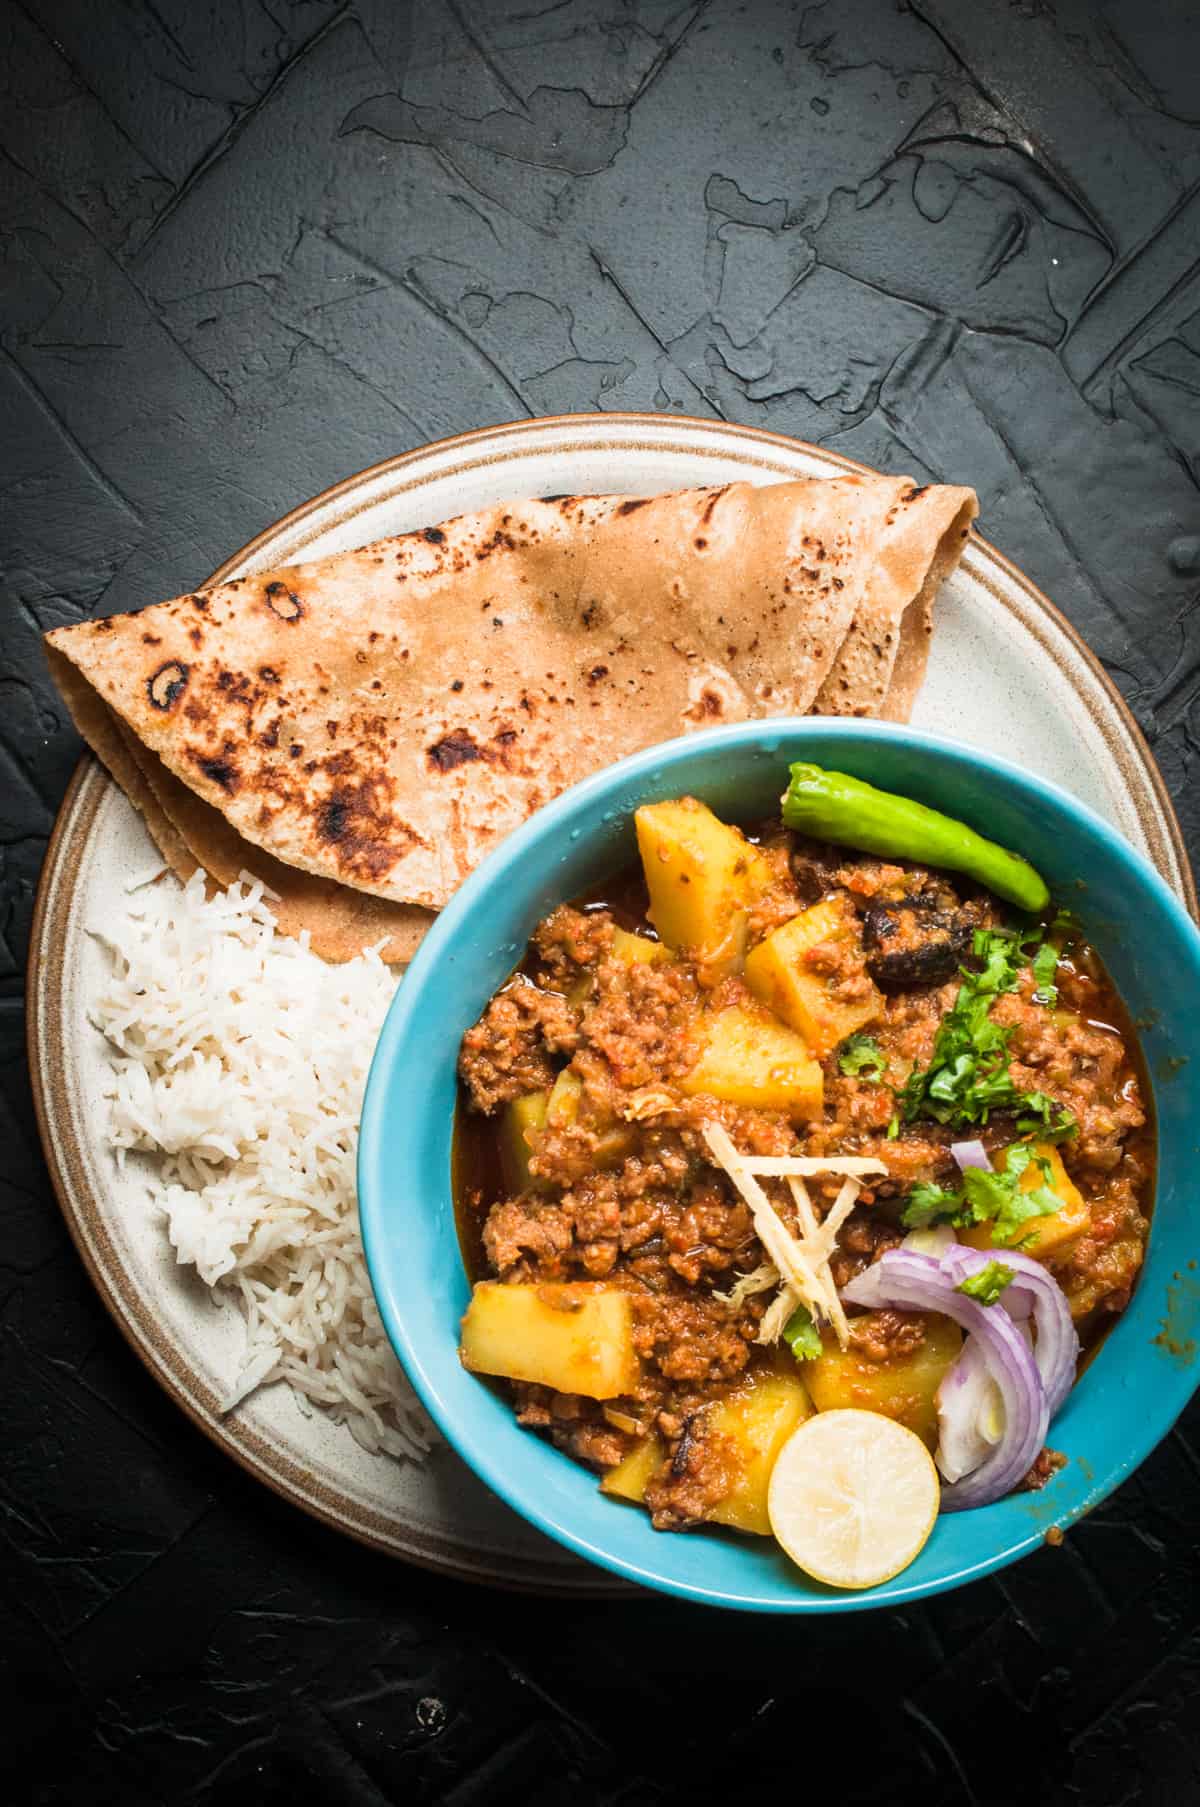 Aloo keema served in bowl with roti and rice on the side.